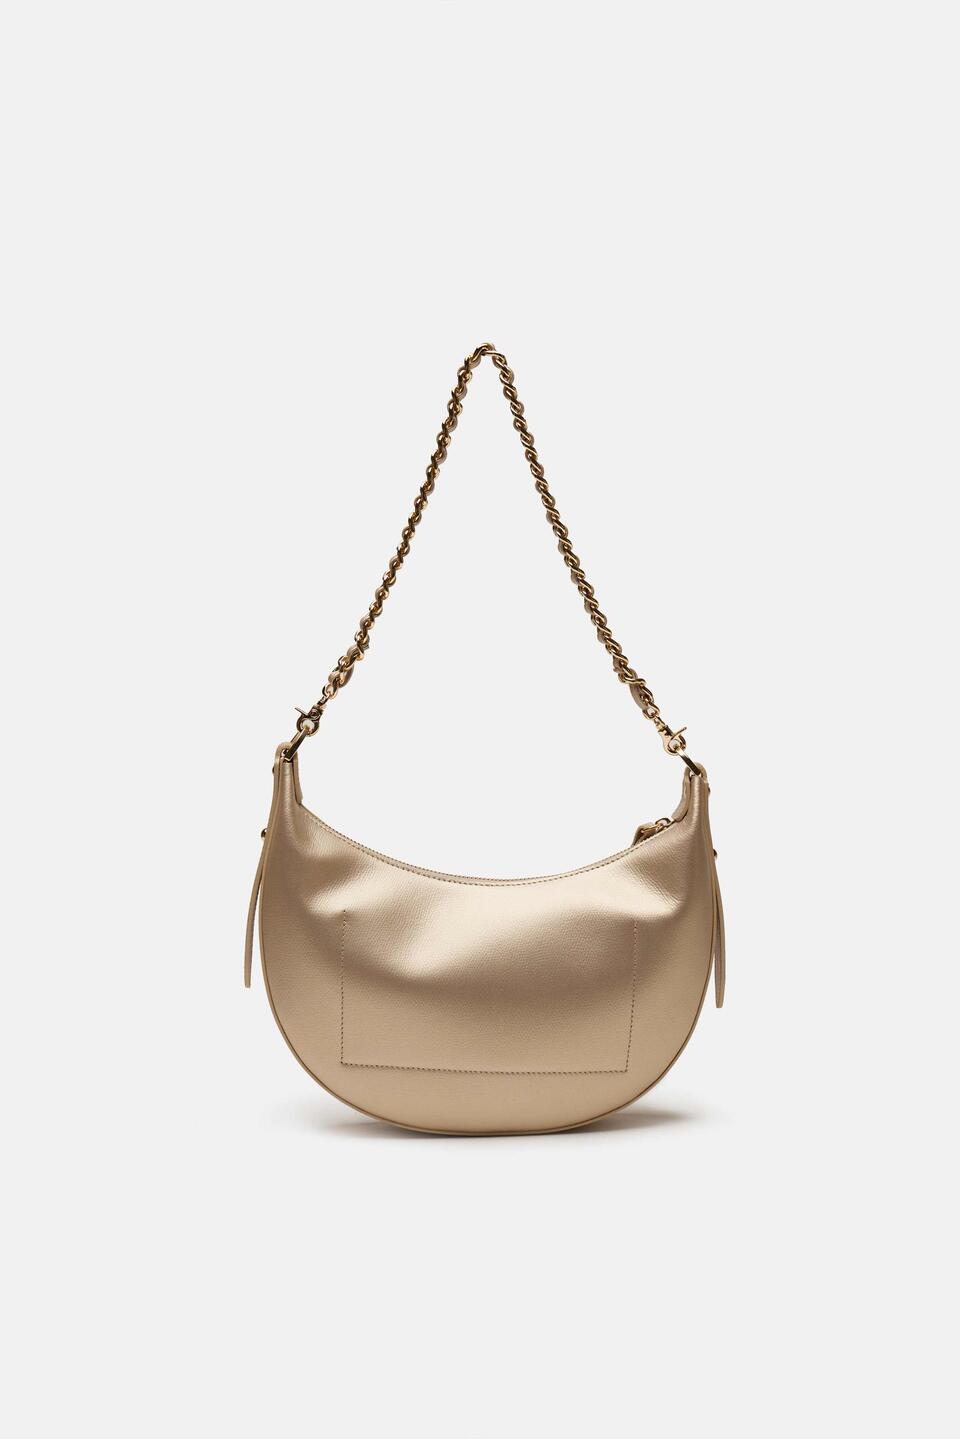 Small Hobo Gold  - Shoulder Bags - Women's Bags - Bags - Cuoieria Fiorentina